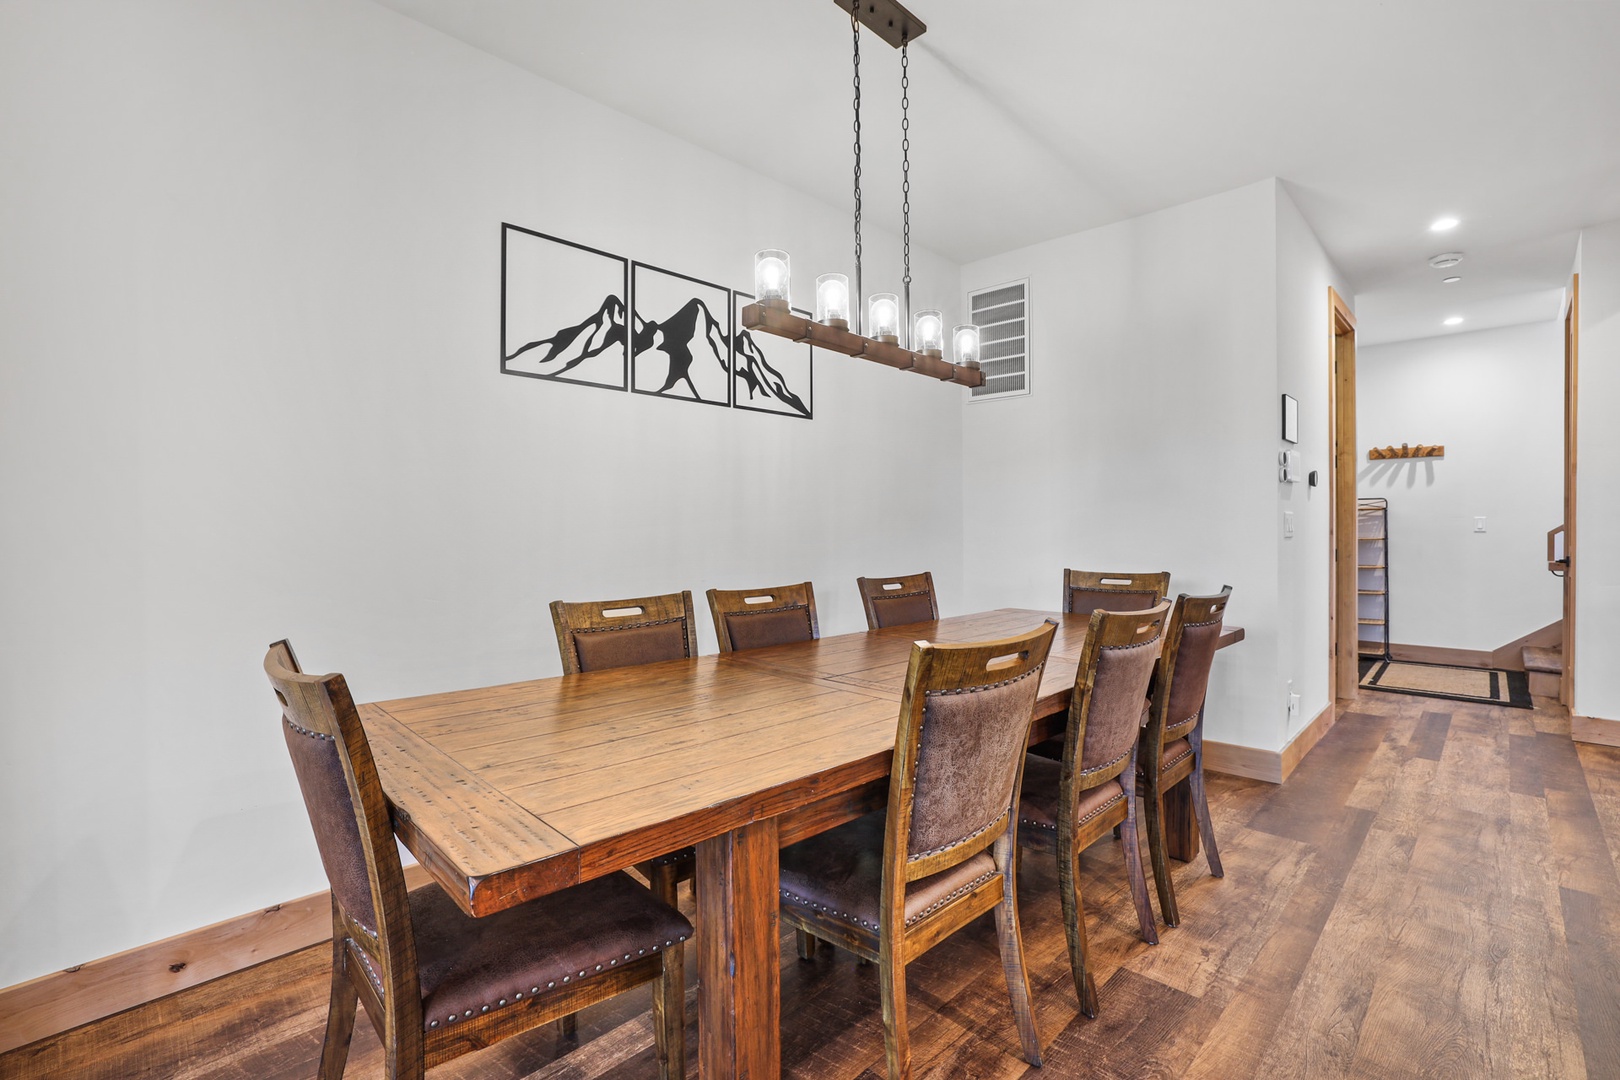 Dining table with seating for 8